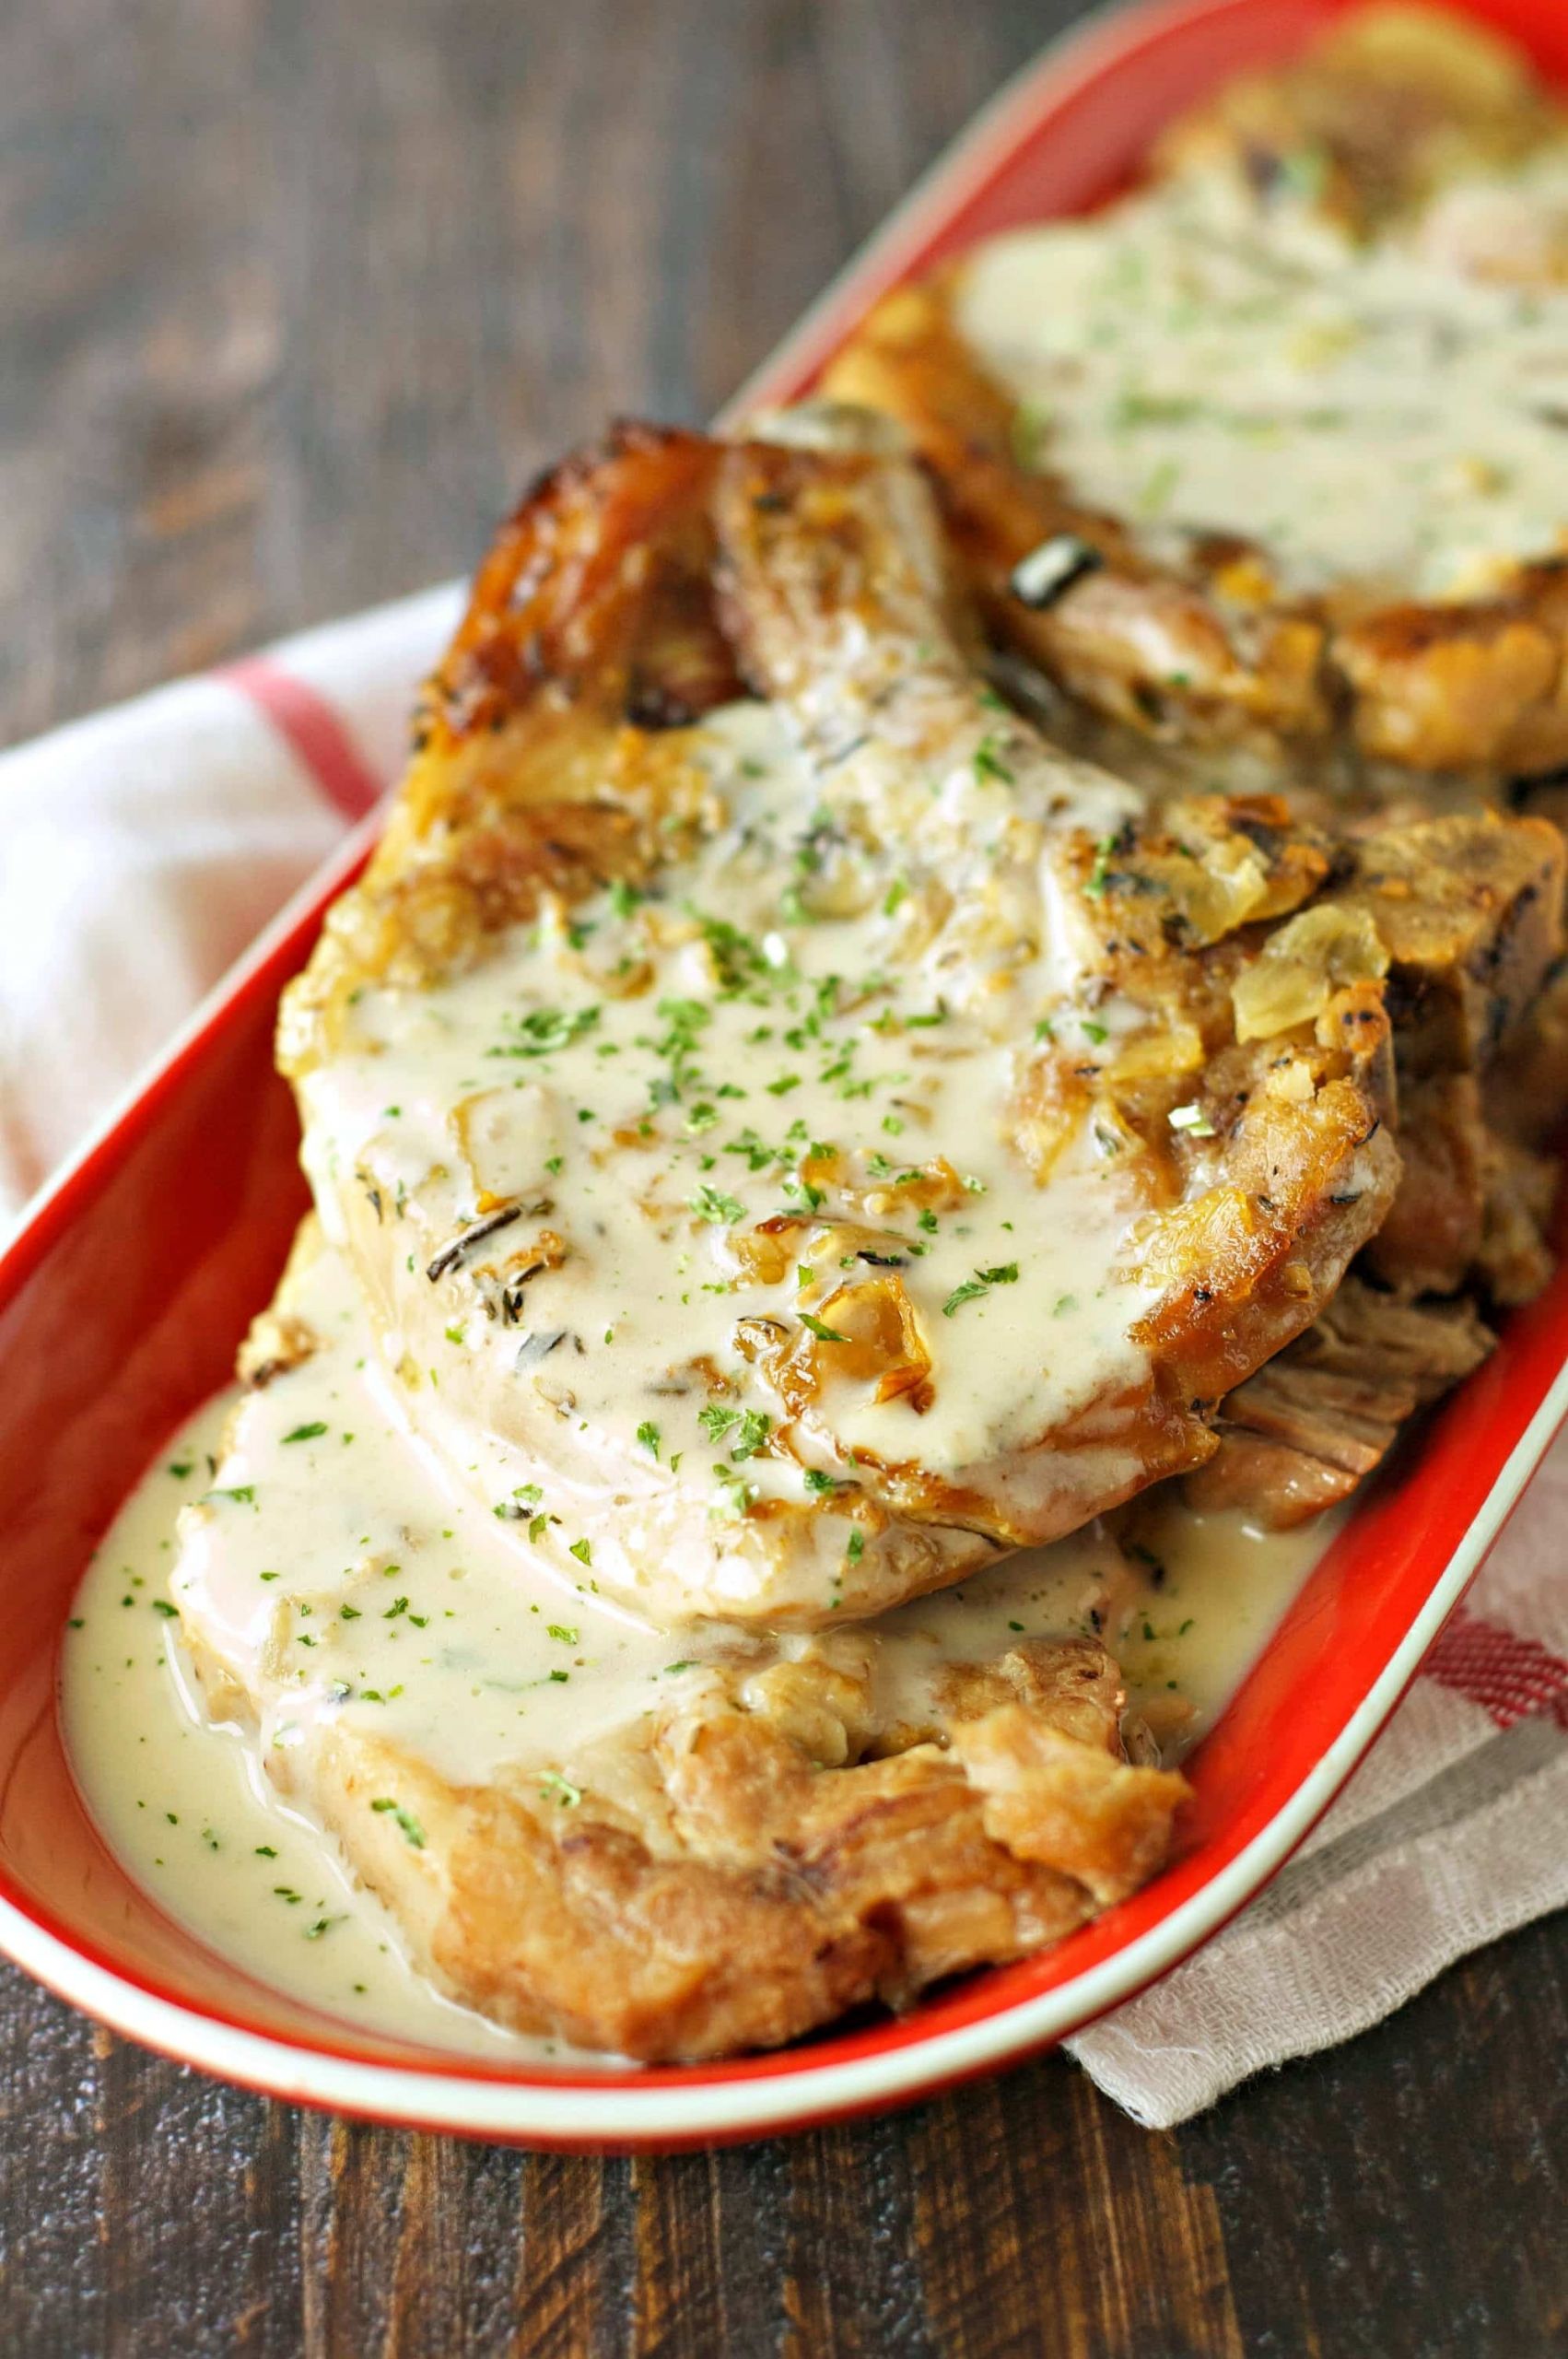 Pork Chops In Slow Cooker Recipes
 Slow Cooker Pork Chops with Creamy Herb Sauce Slow